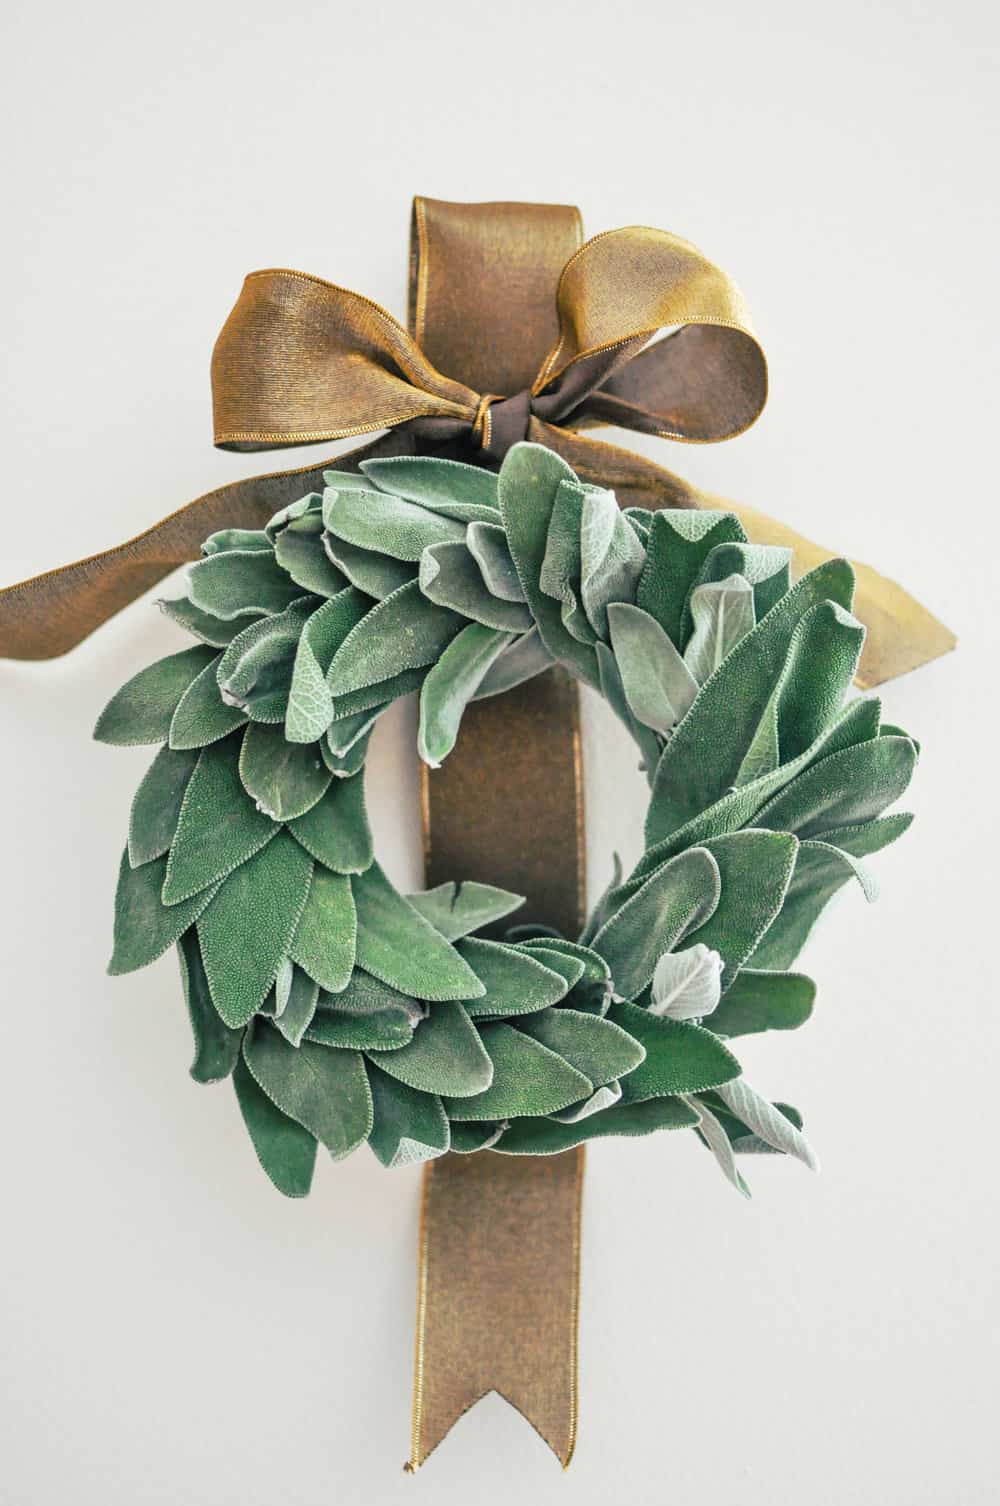 A sage wreath with a golden ribbon in a bow behind it.